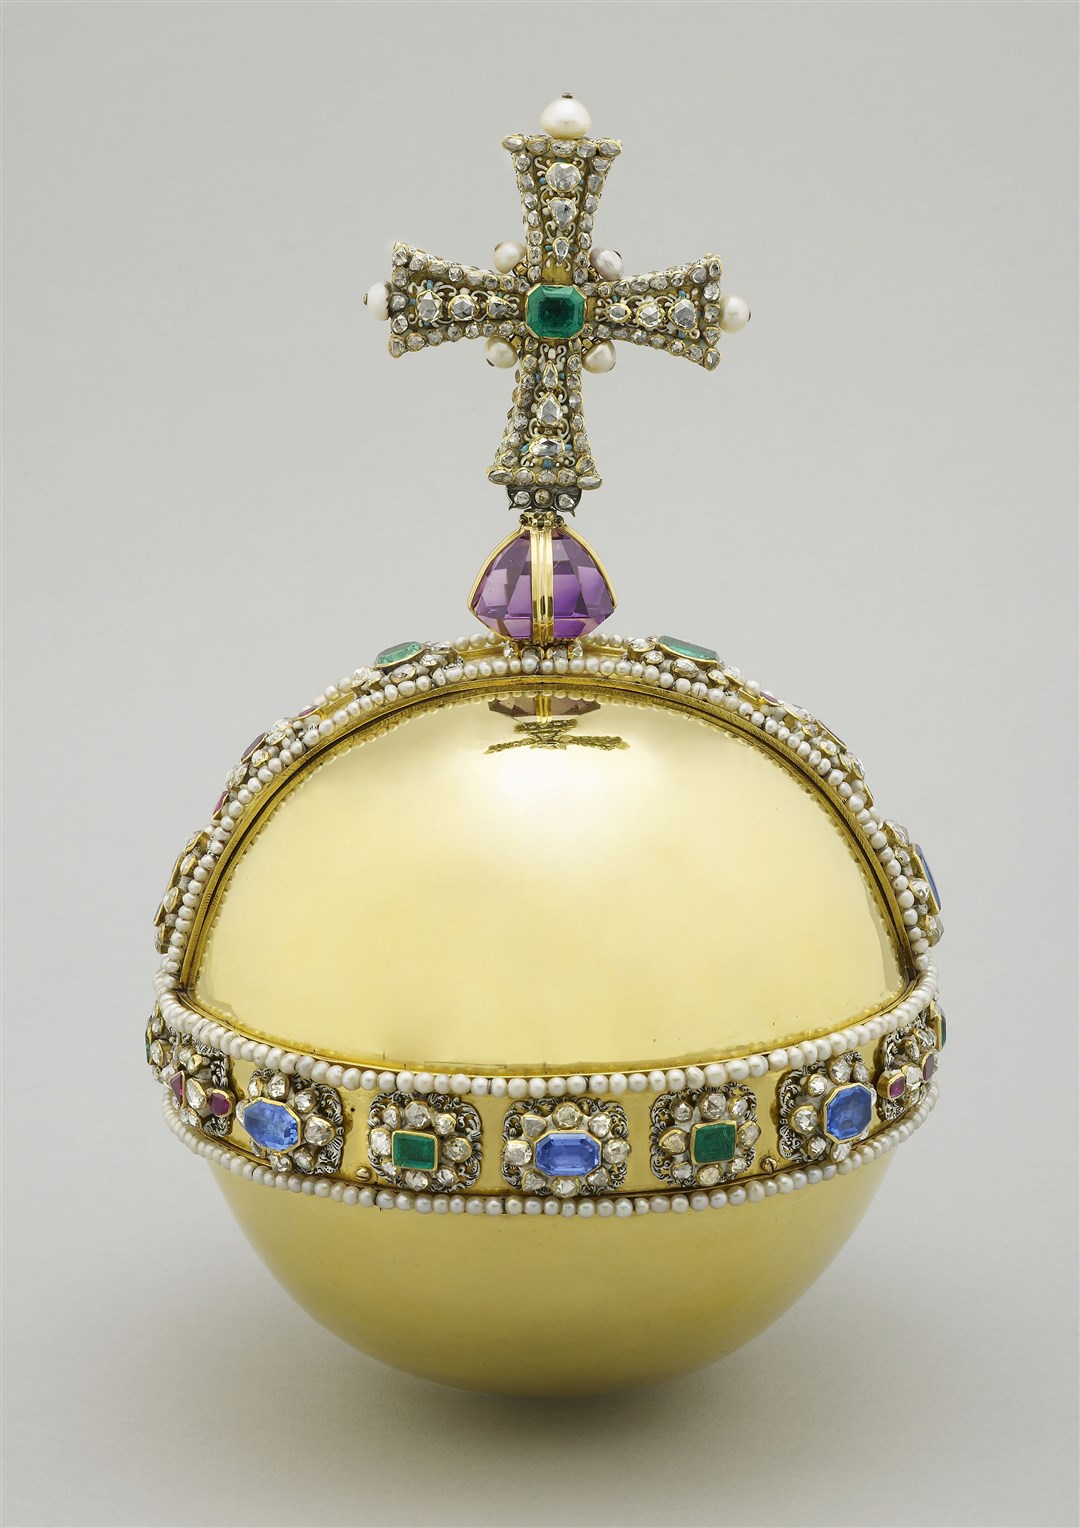 The Sovereign’s Orb will feature in the ceremony (Royal Collection Trust/HM King Charles III/PA)